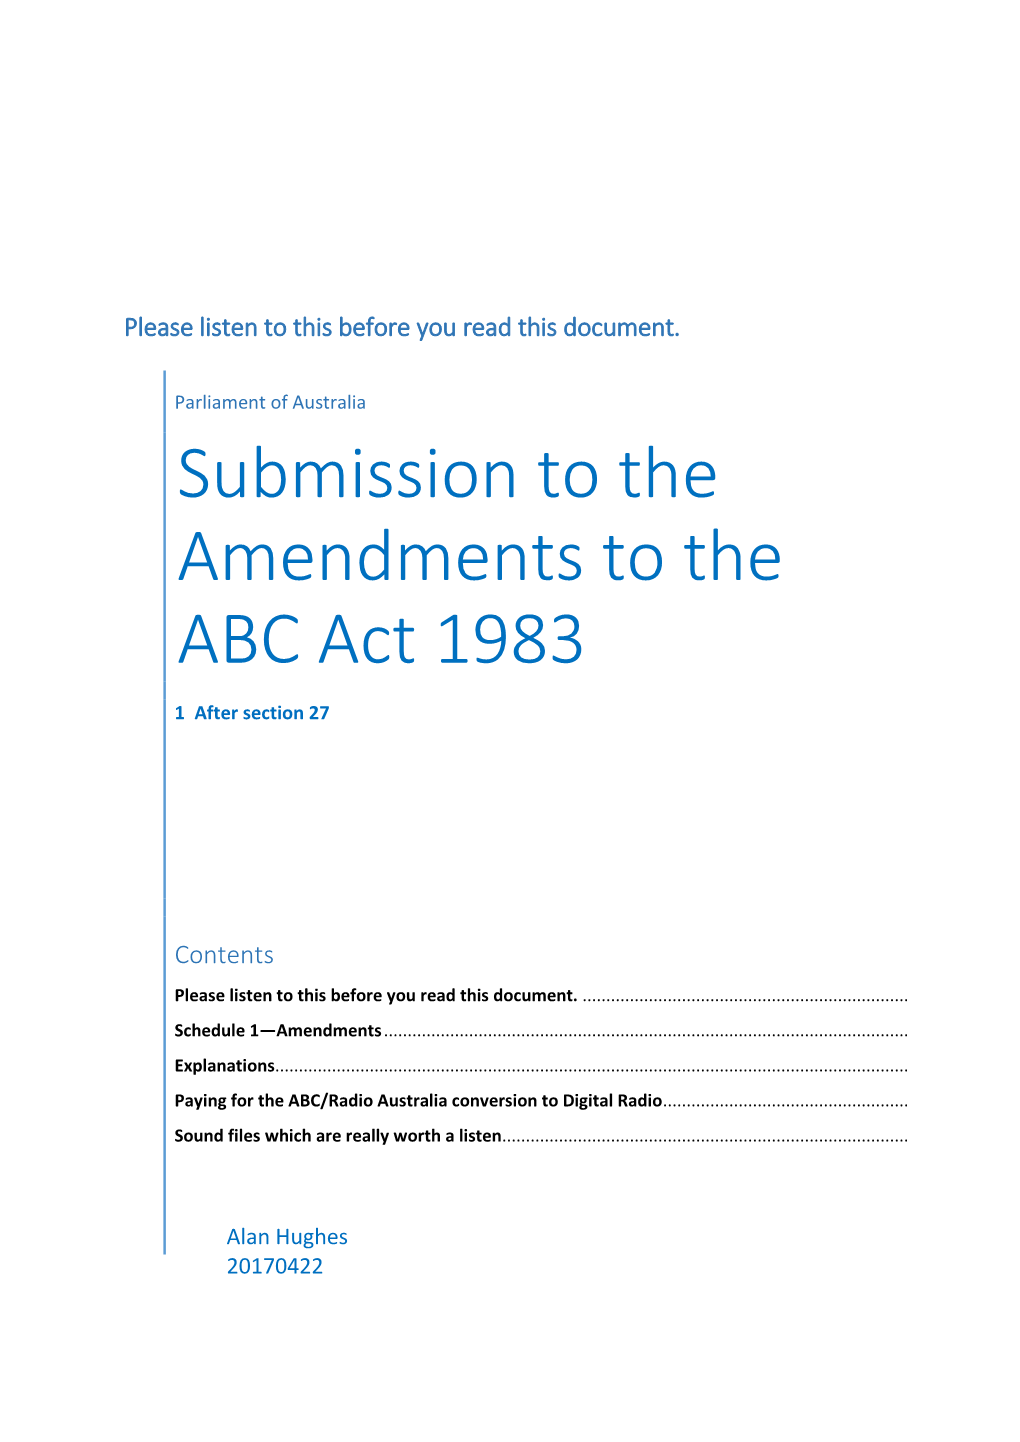 Submission to the Amendments to the ABC Act 1983